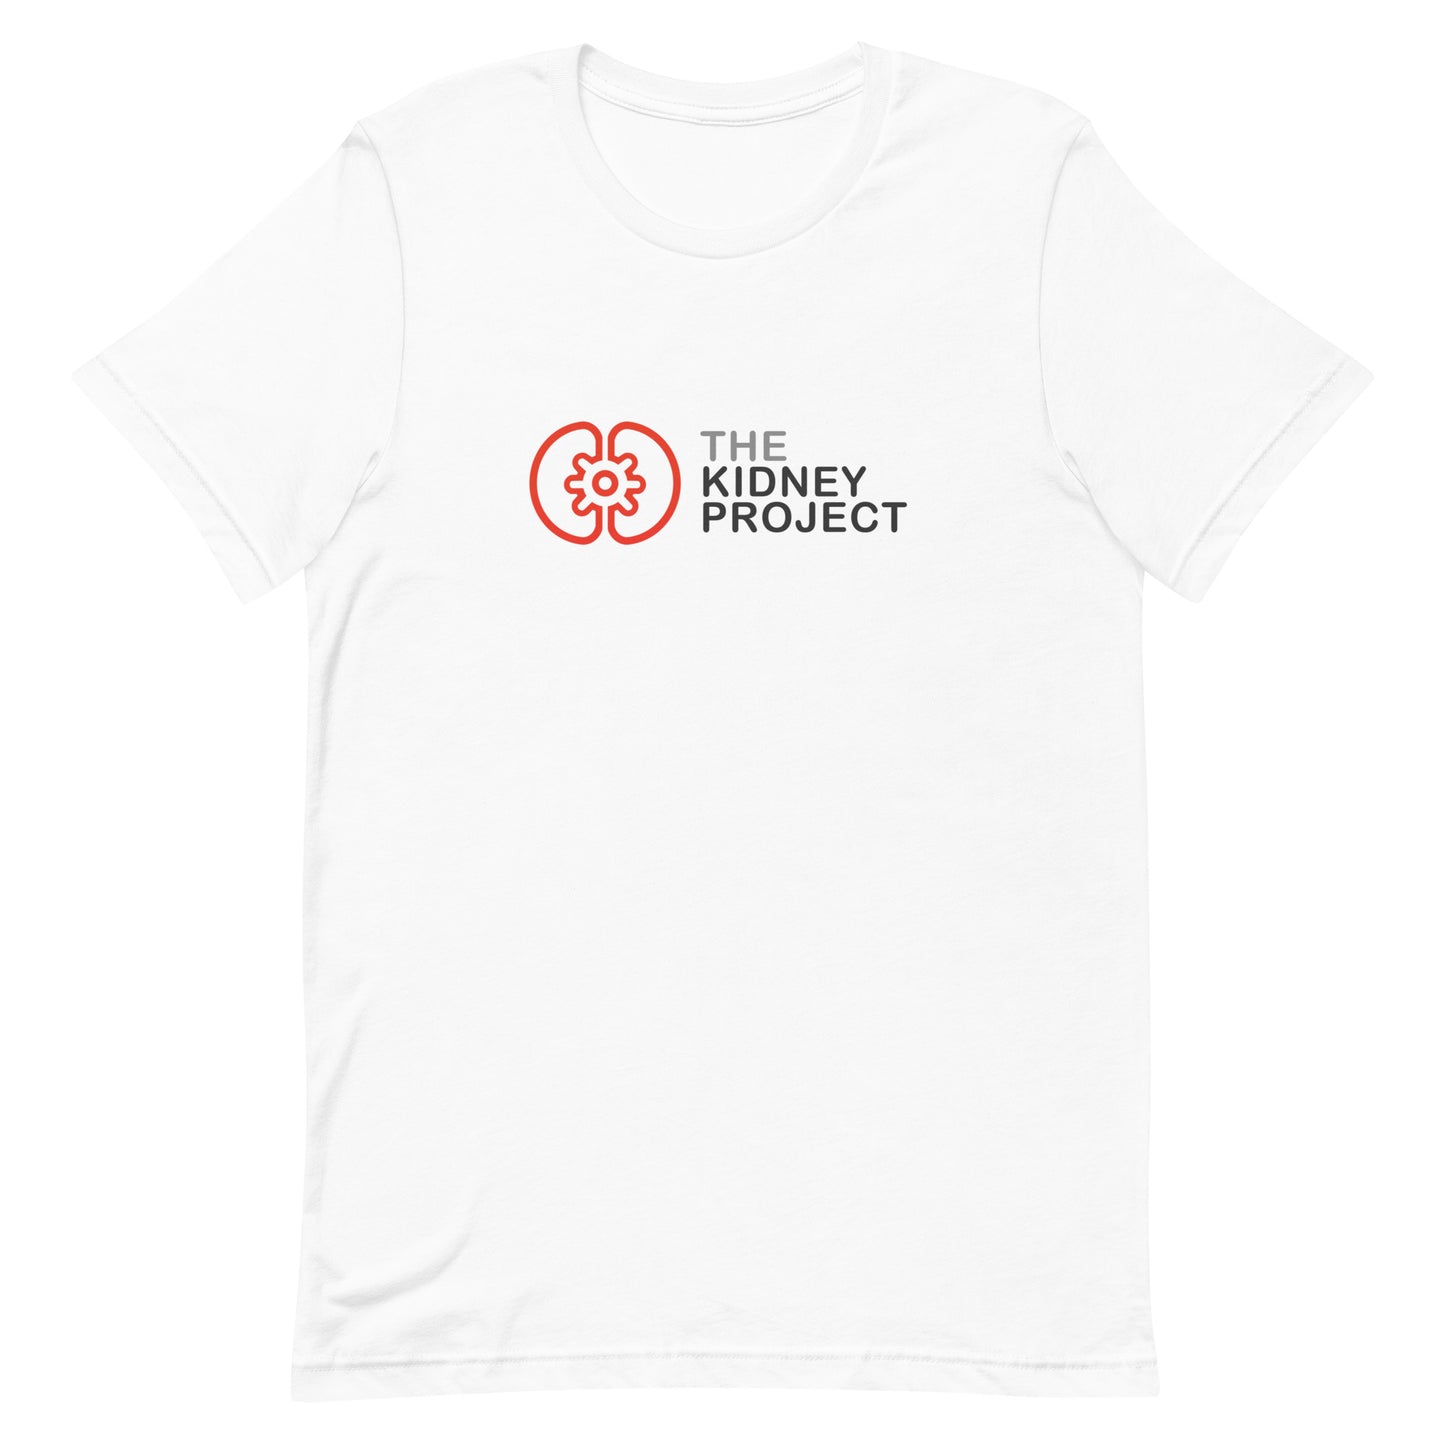 The Kidney Project Original Logo T-shirt (Only White)